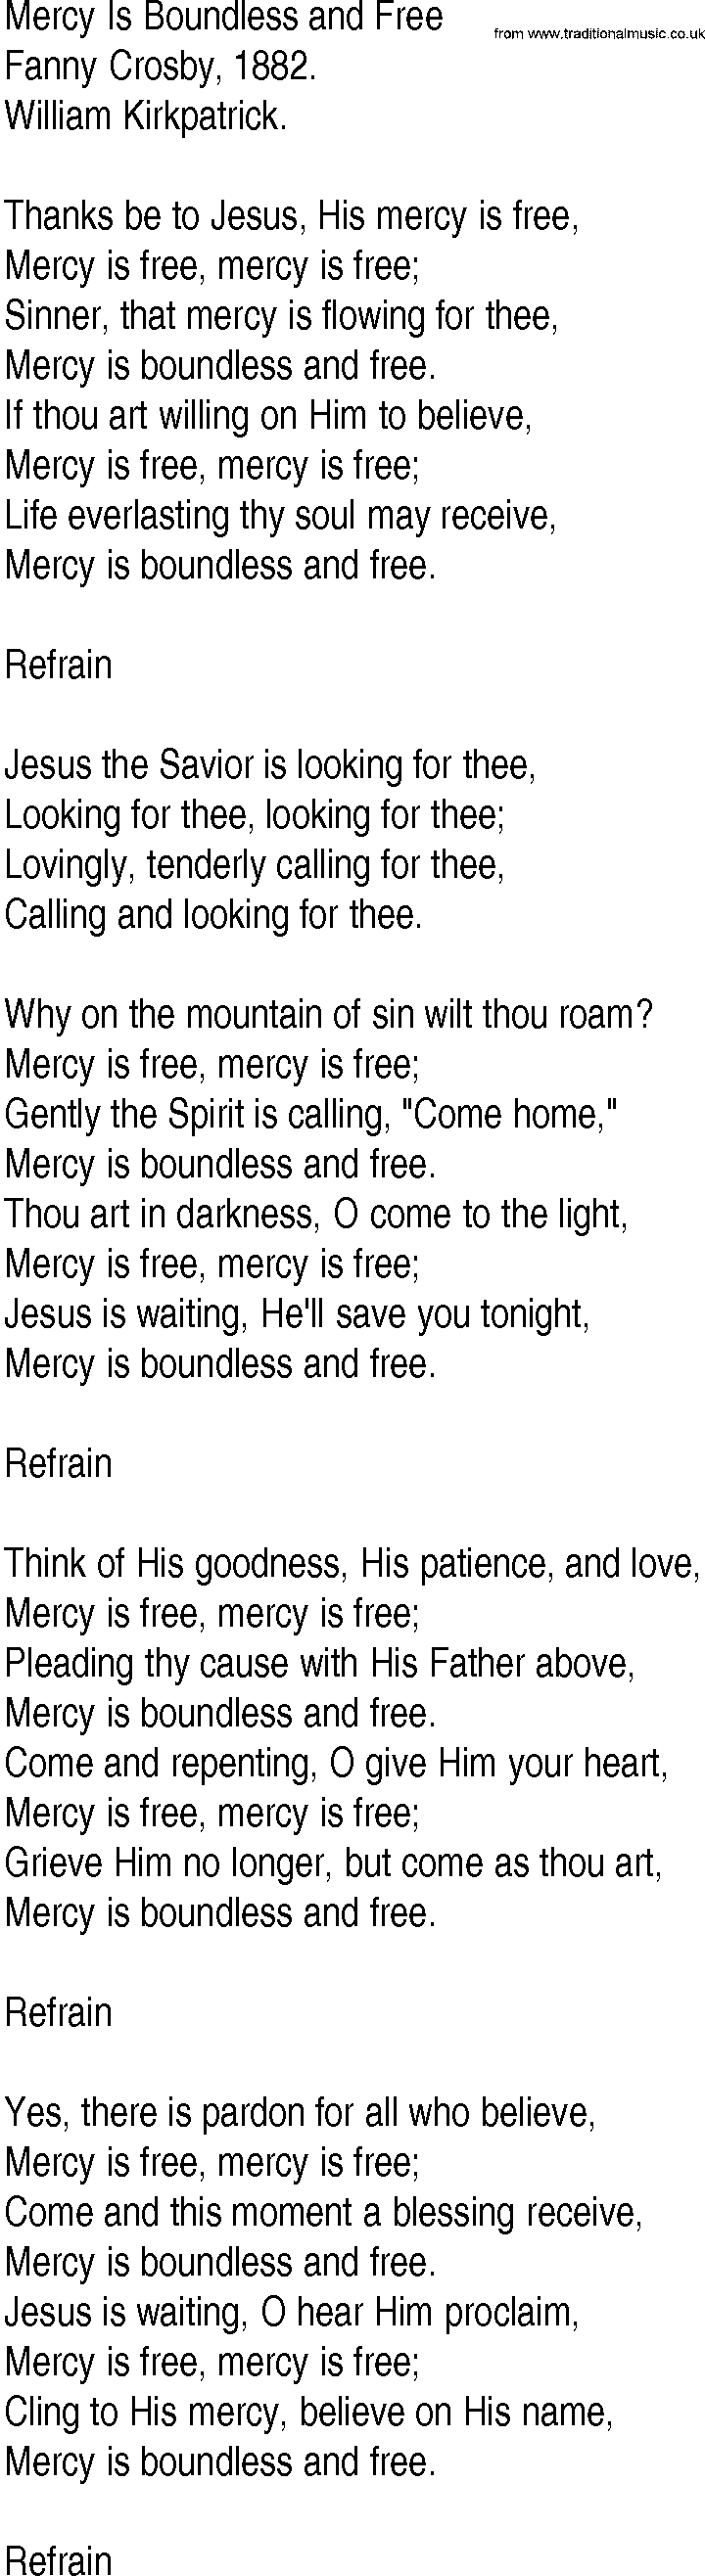 Hymn and Gospel Song: Mercy Is Boundless and Free by Fanny Crosby lyrics